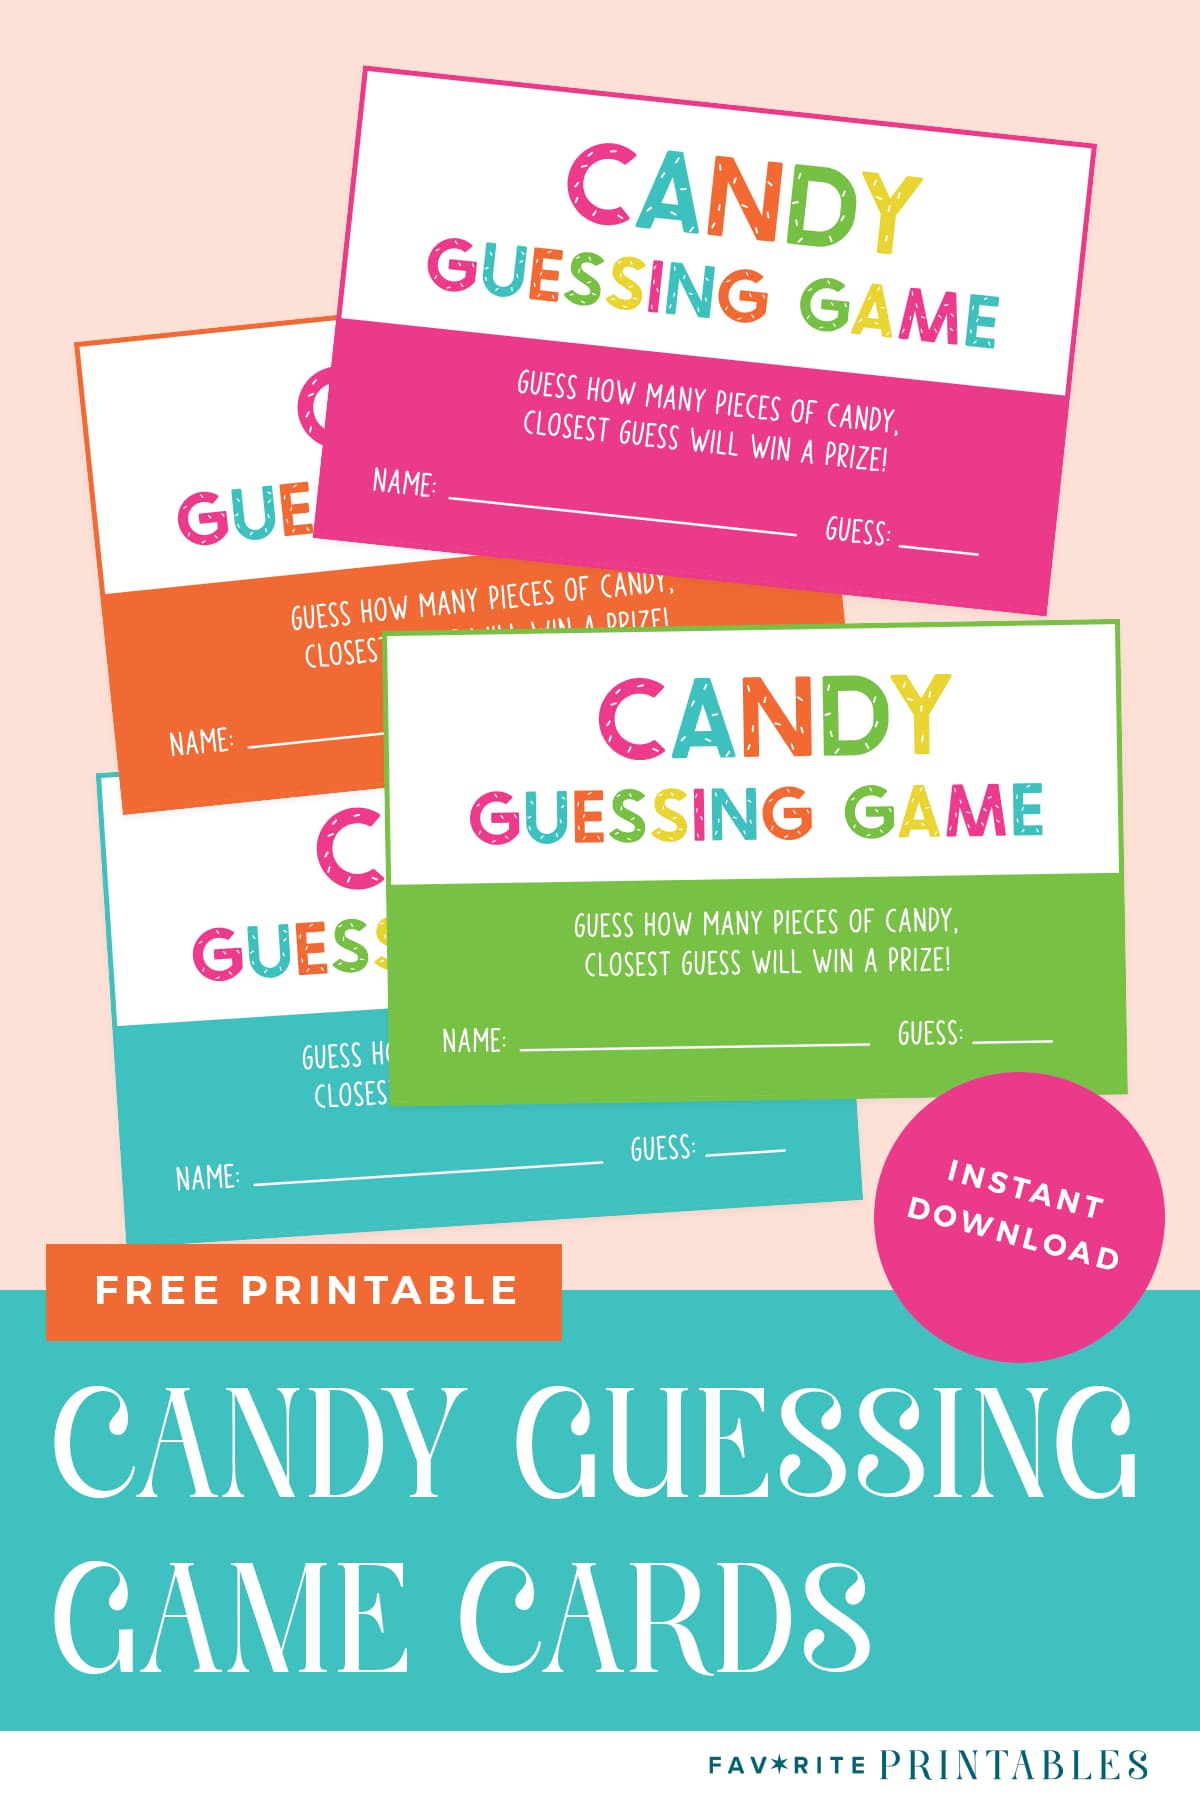 Candy guessing game cards pin.